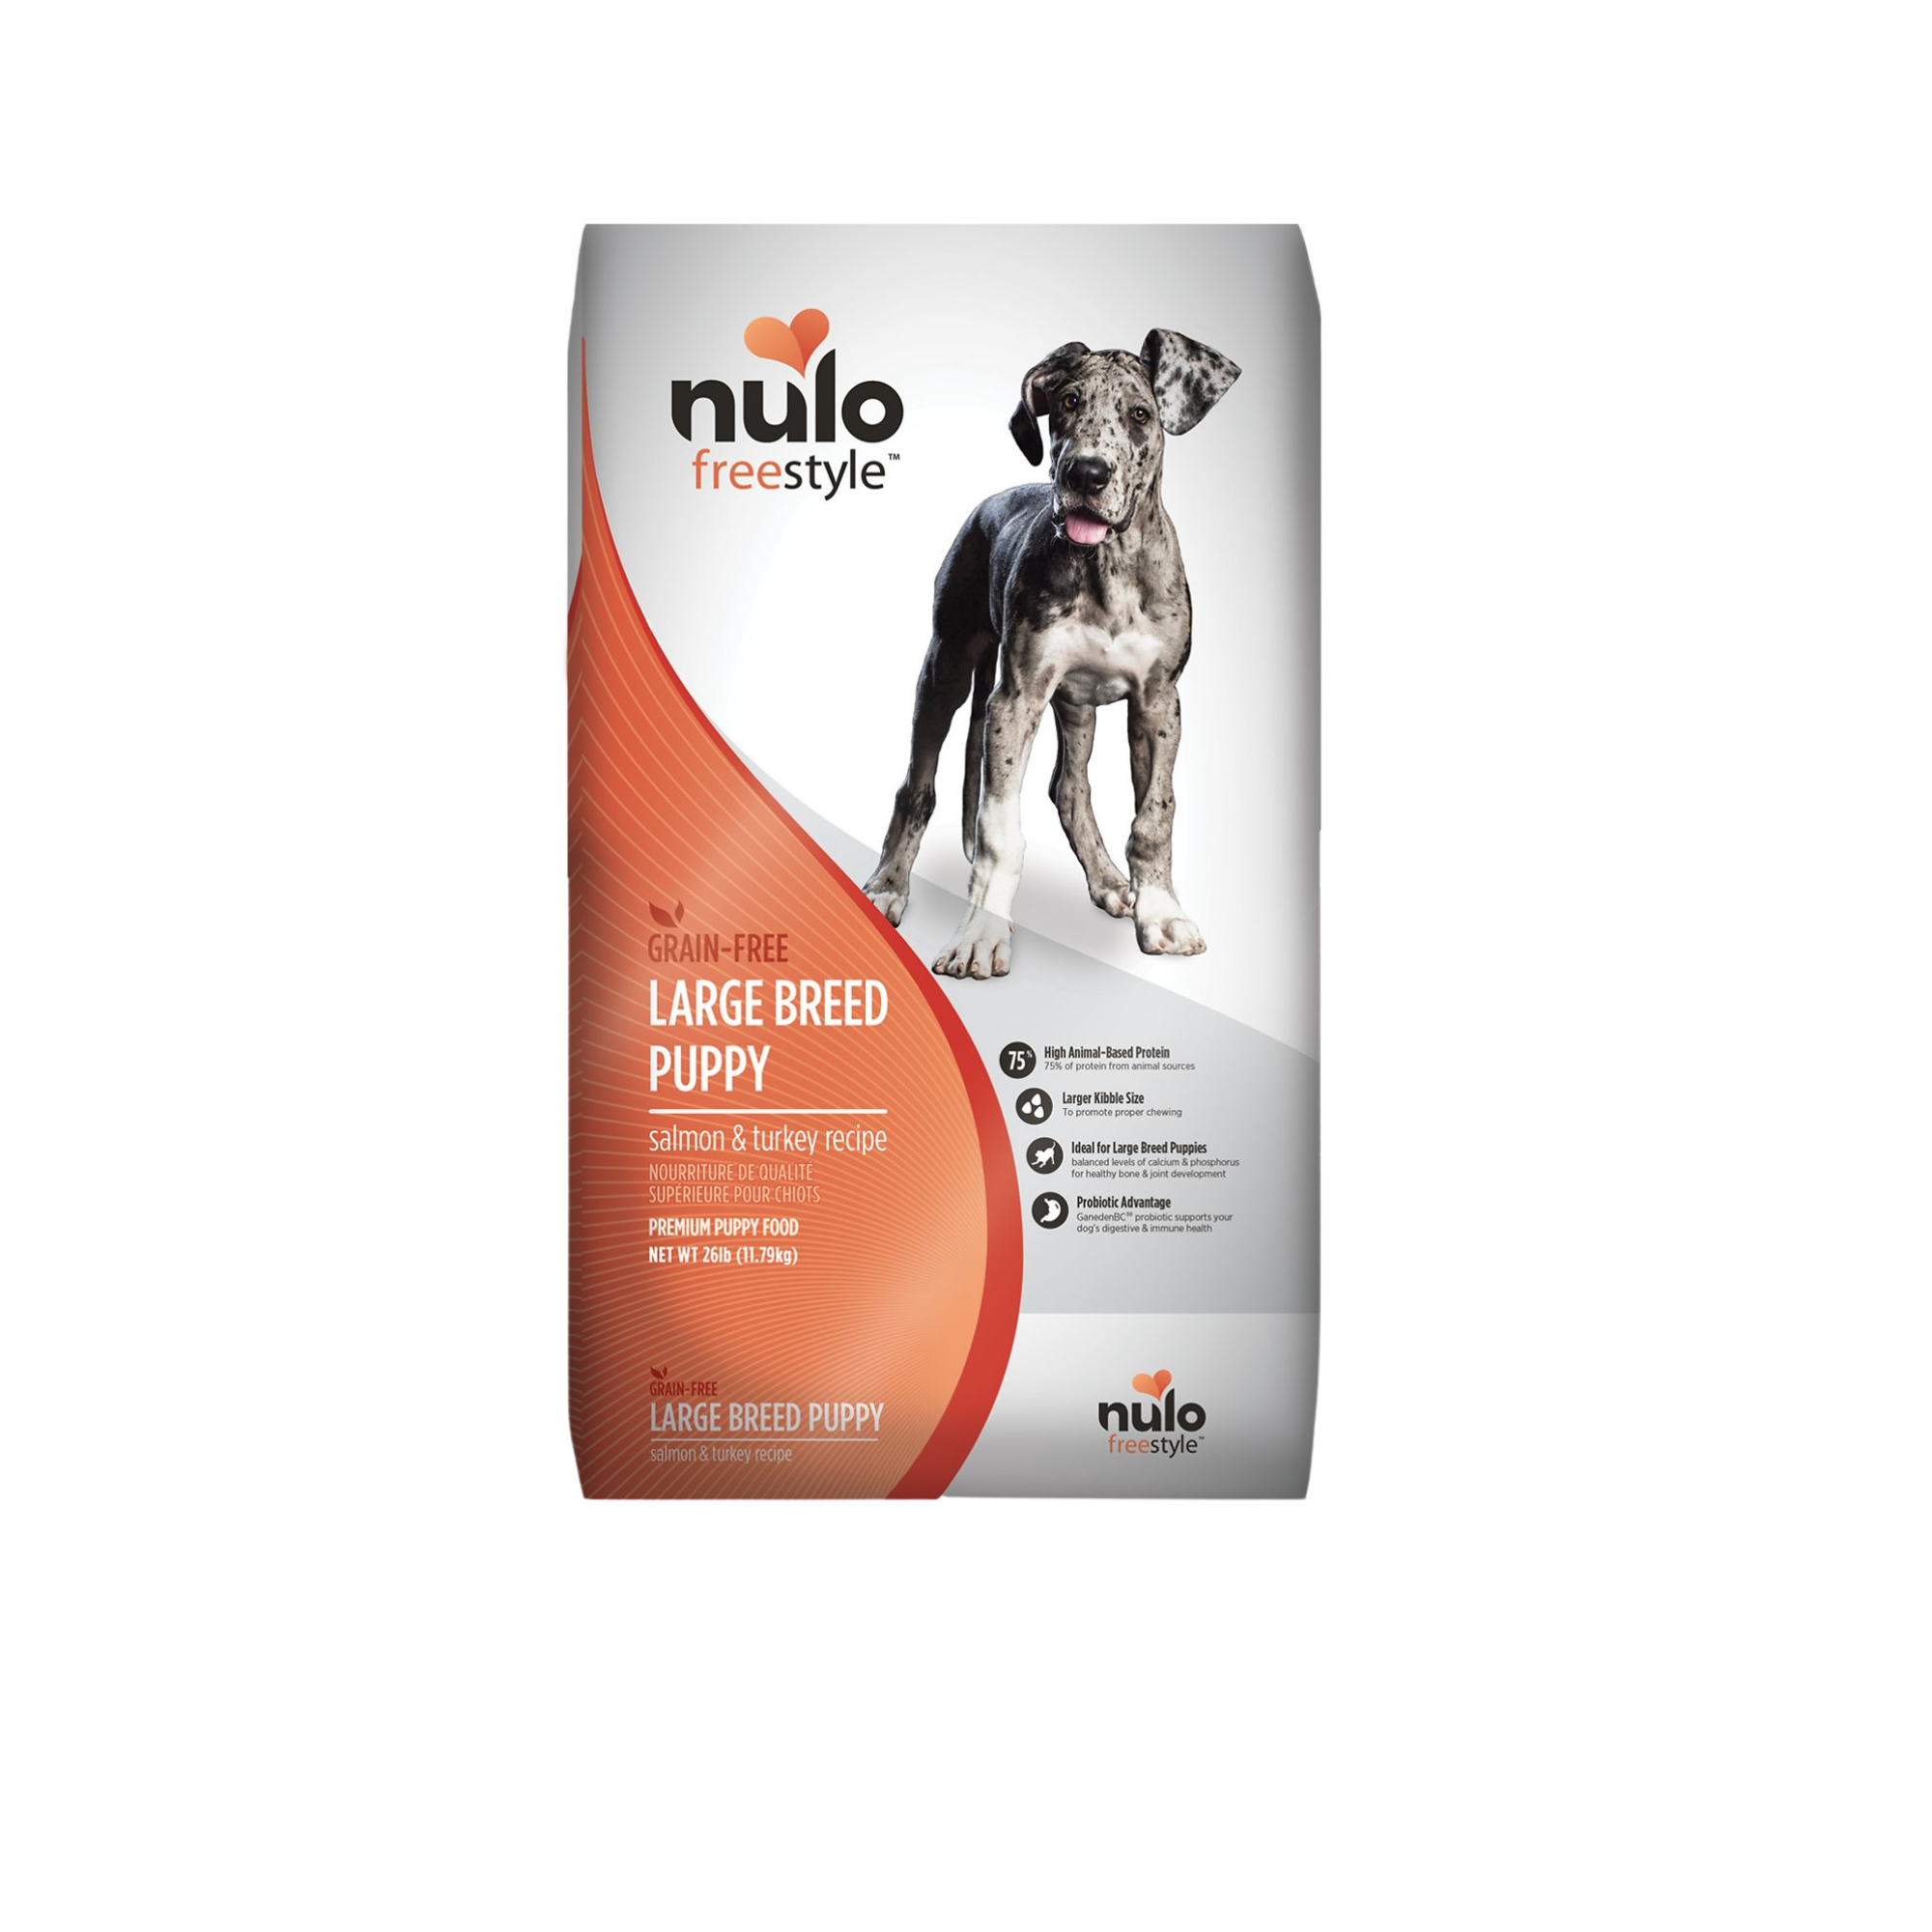 Nulo Freestyle Grain-Free Large Breed Puppy Salmon & Turkey Recipe Dry Dog Food - Mutts & Co.